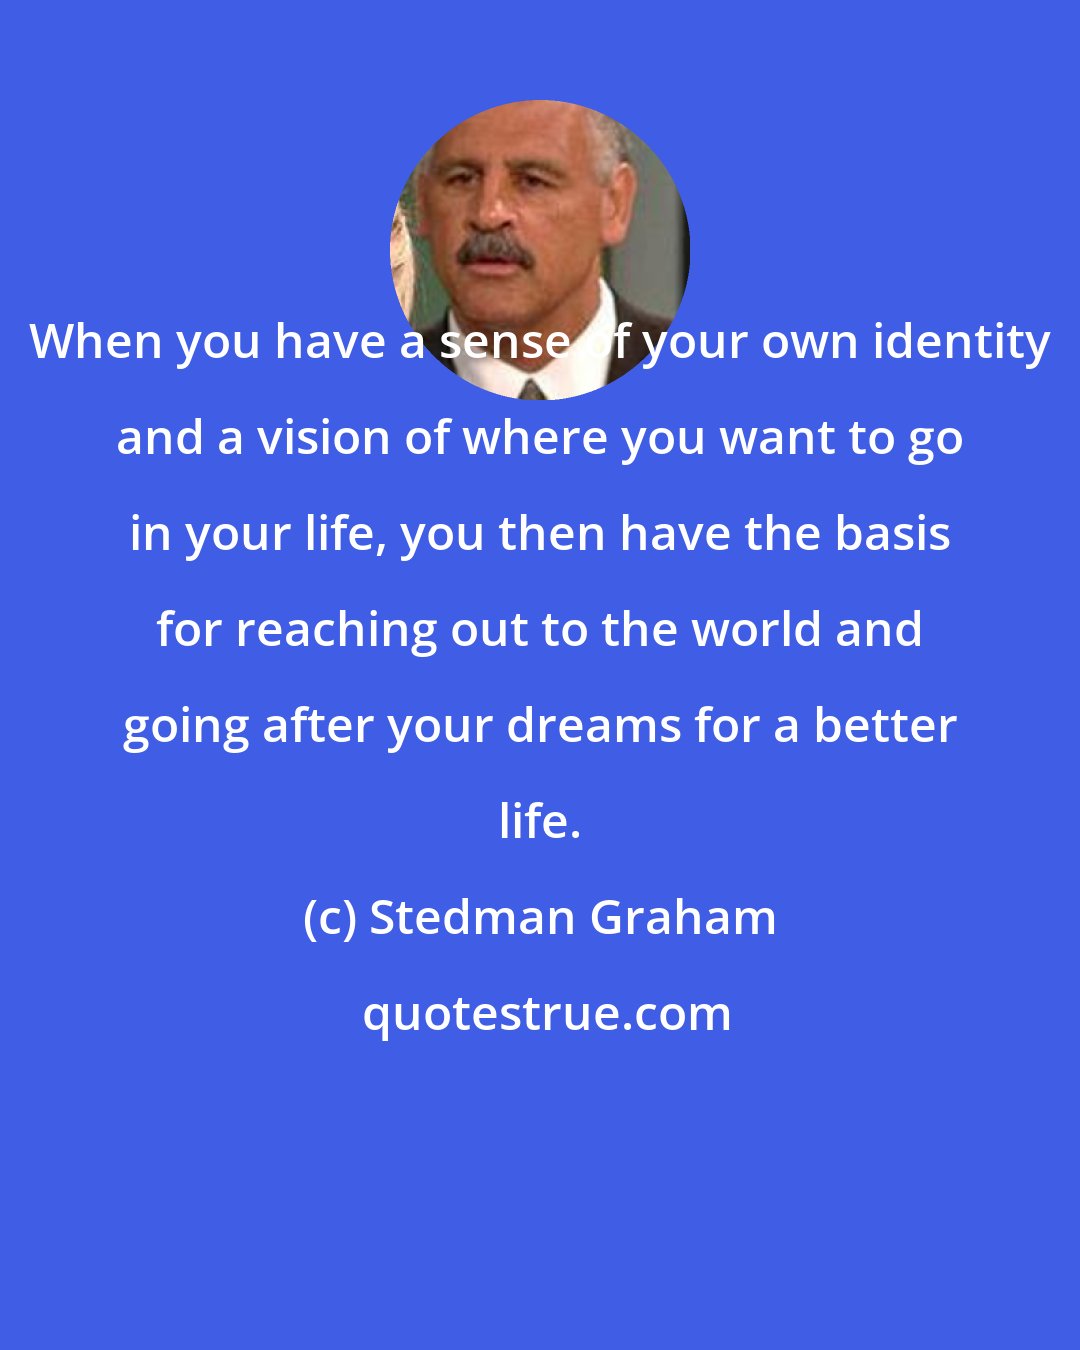 Stedman Graham: When you have a sense of your own identity and a vision of where you want to go in your life, you then have the basis for reaching out to the world and going after your dreams for a better life.